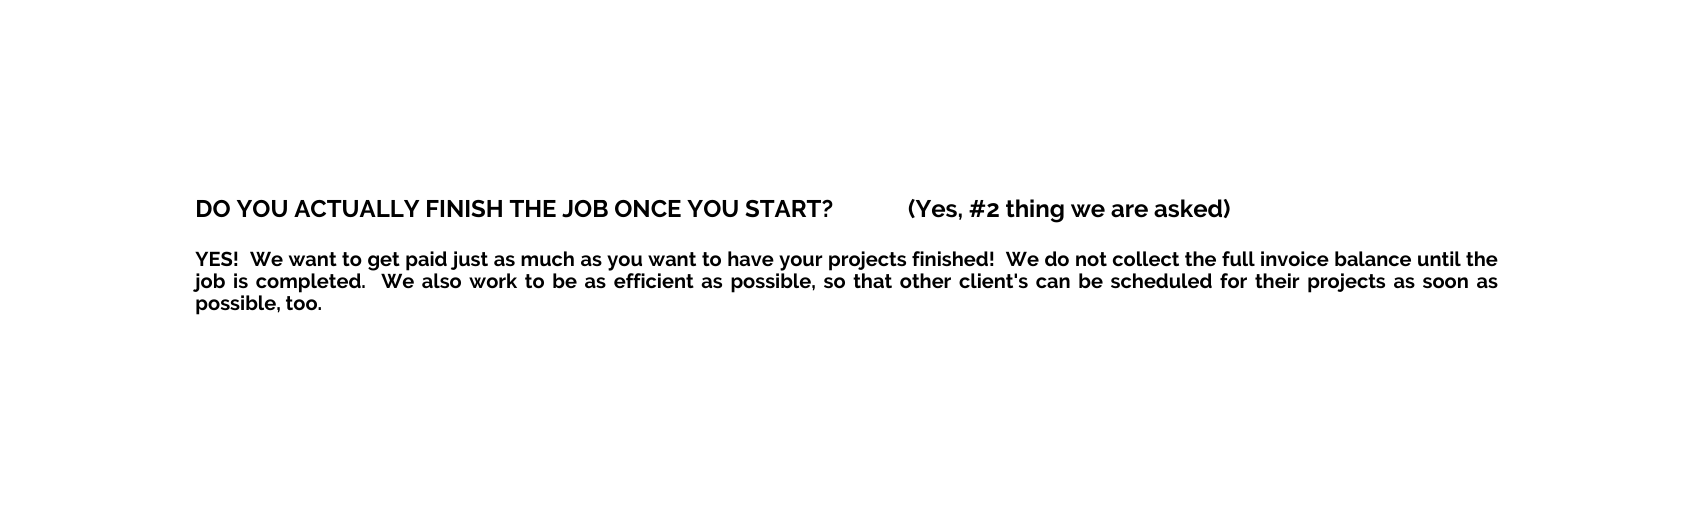 DO YOU ACTUALLY FINISH THE JOB ONCE YOU START Yes 2 thing we are asked YES We want to get paid just as much as you want to have your projects finished We do not collect the full invoice balance until the job is completed We also work to be as efficient as possible so that other client s can be scheduled for their projects as soon as possible too